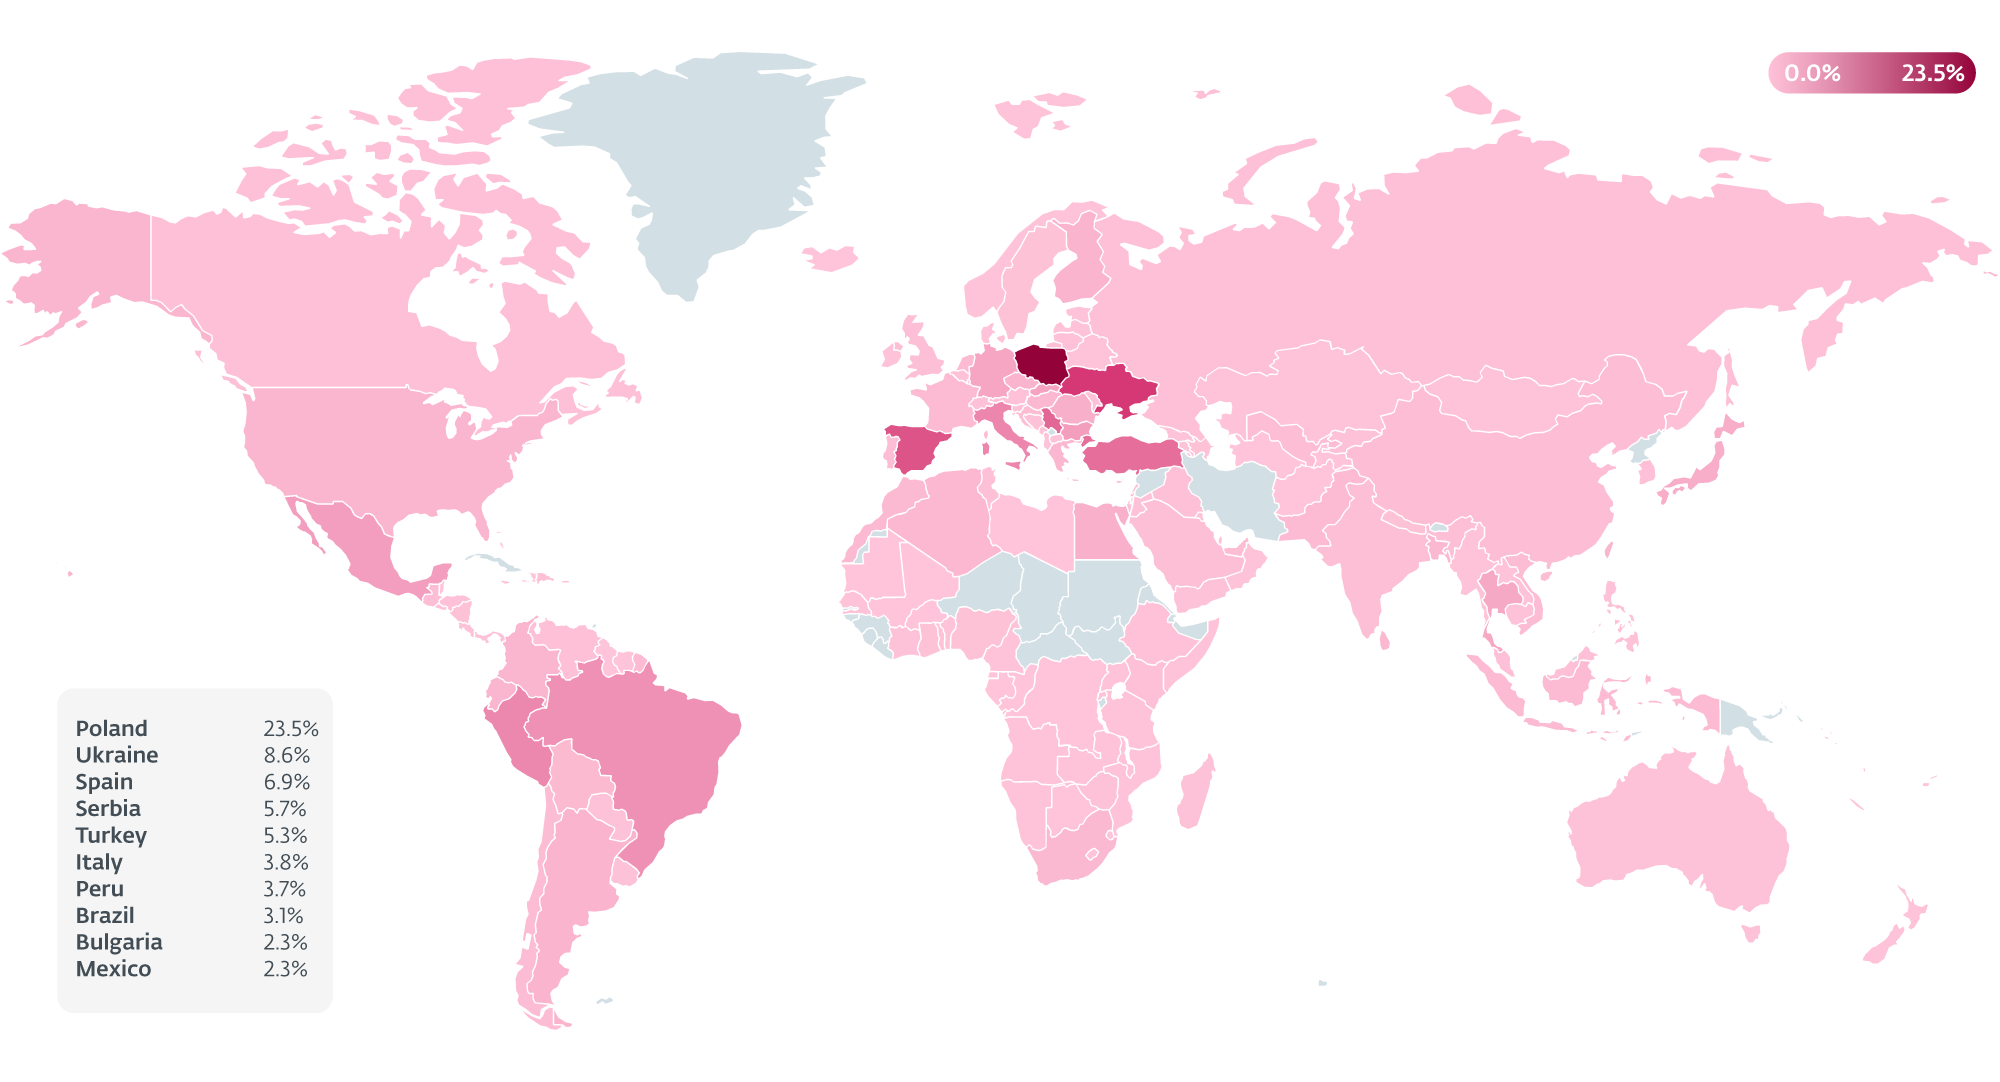 Figure 3. Heatmap of countries affected by AceCryptor, according to ESET telemetry